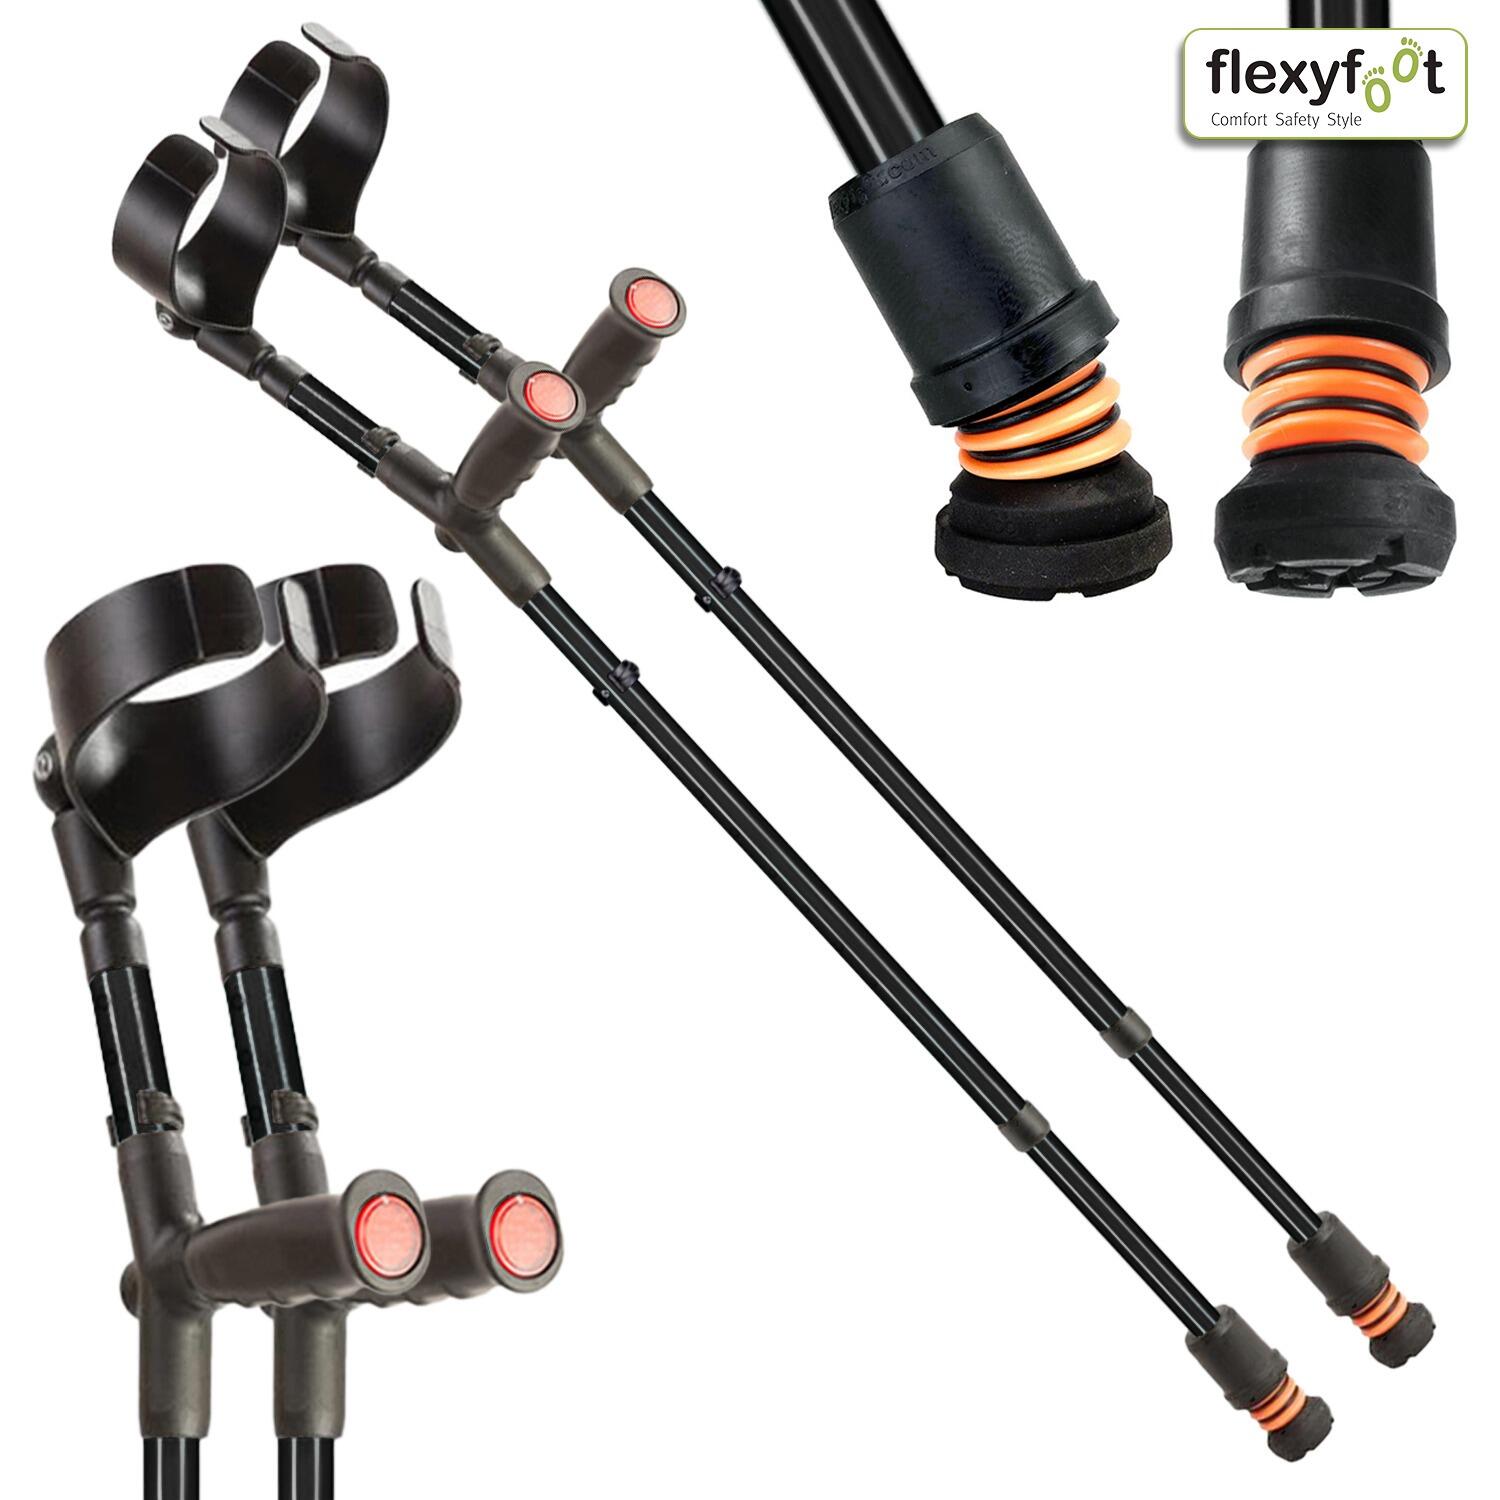 A pair of black Flexyfoot Soft Grip Double Adjustable Crutches